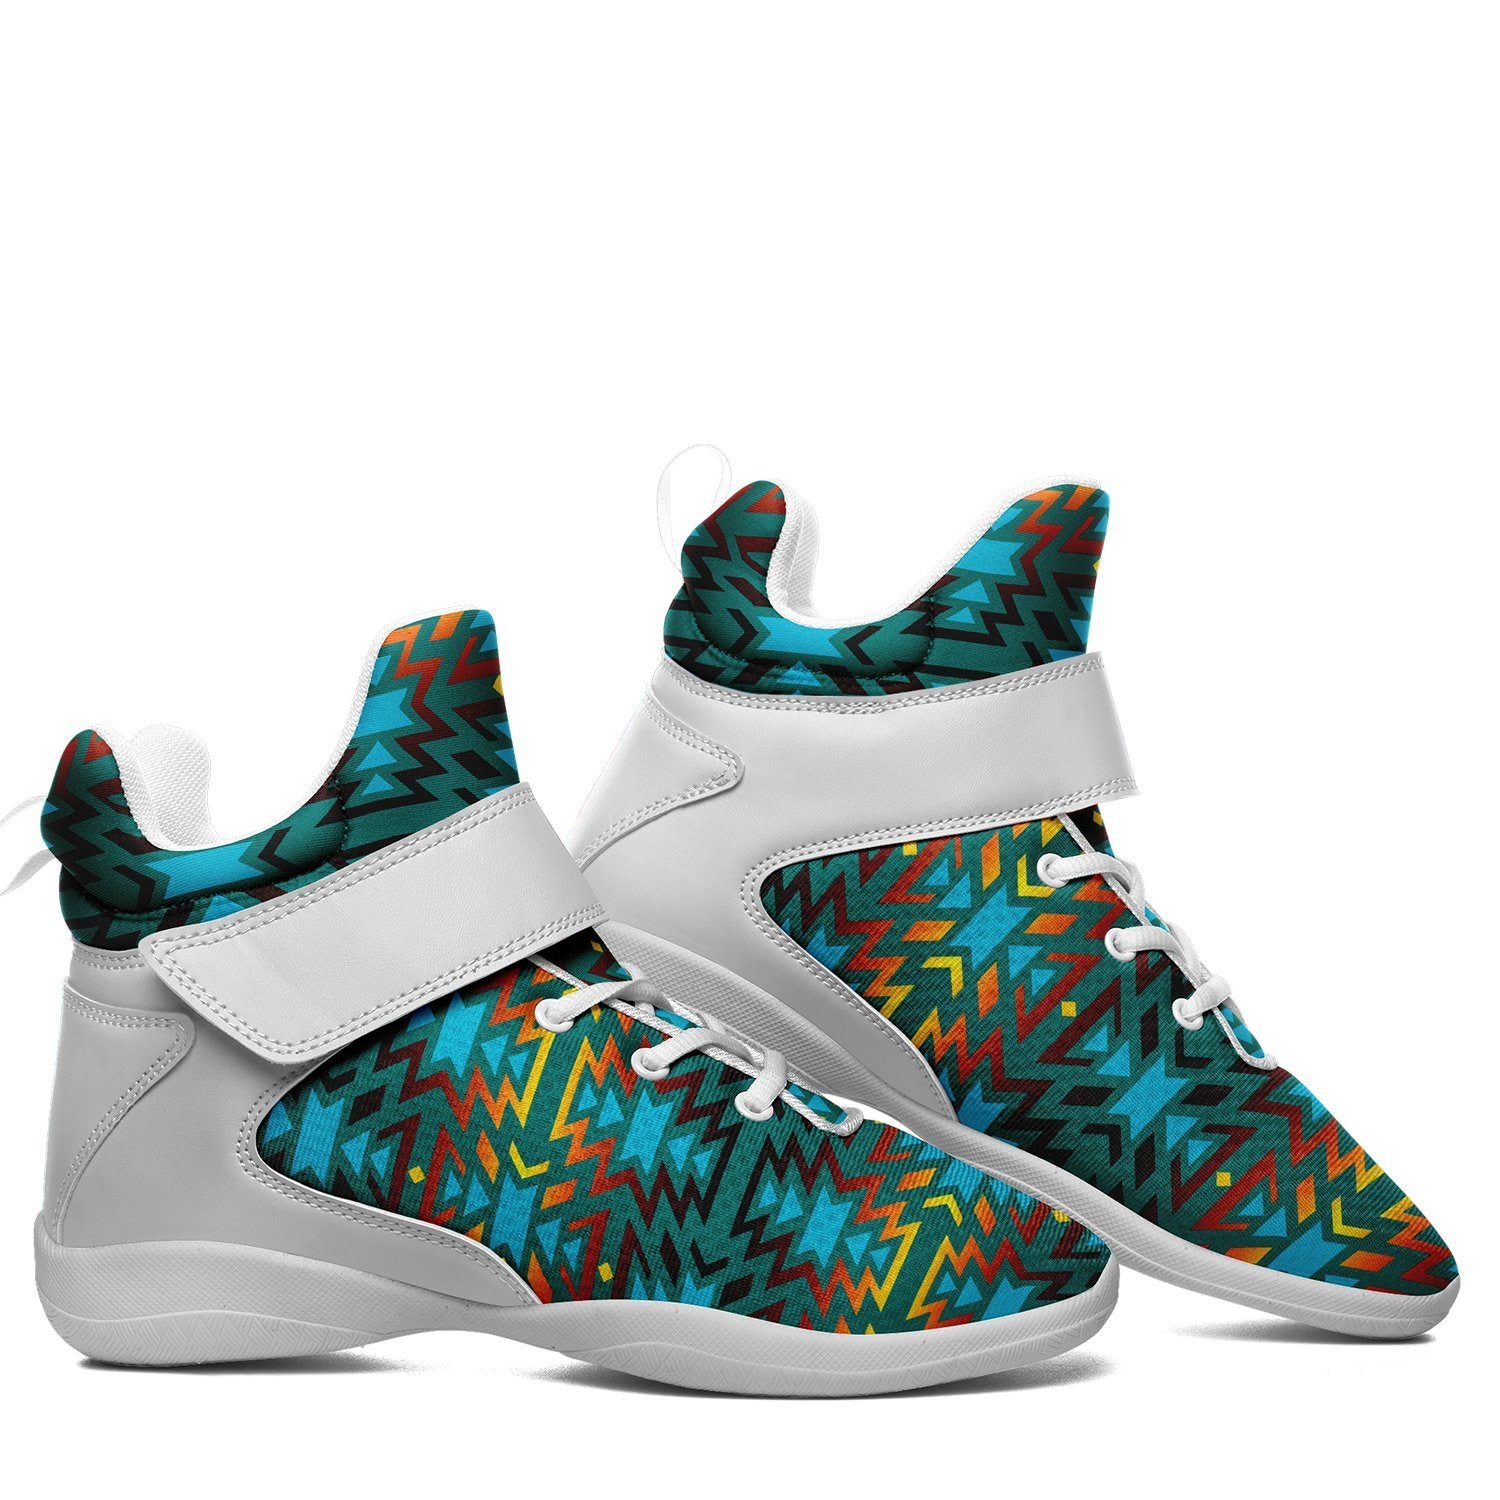 Fire Colors and Turquoise Teal Ipottaa Basketball / Sport High Top Shoes 49 Dzine 